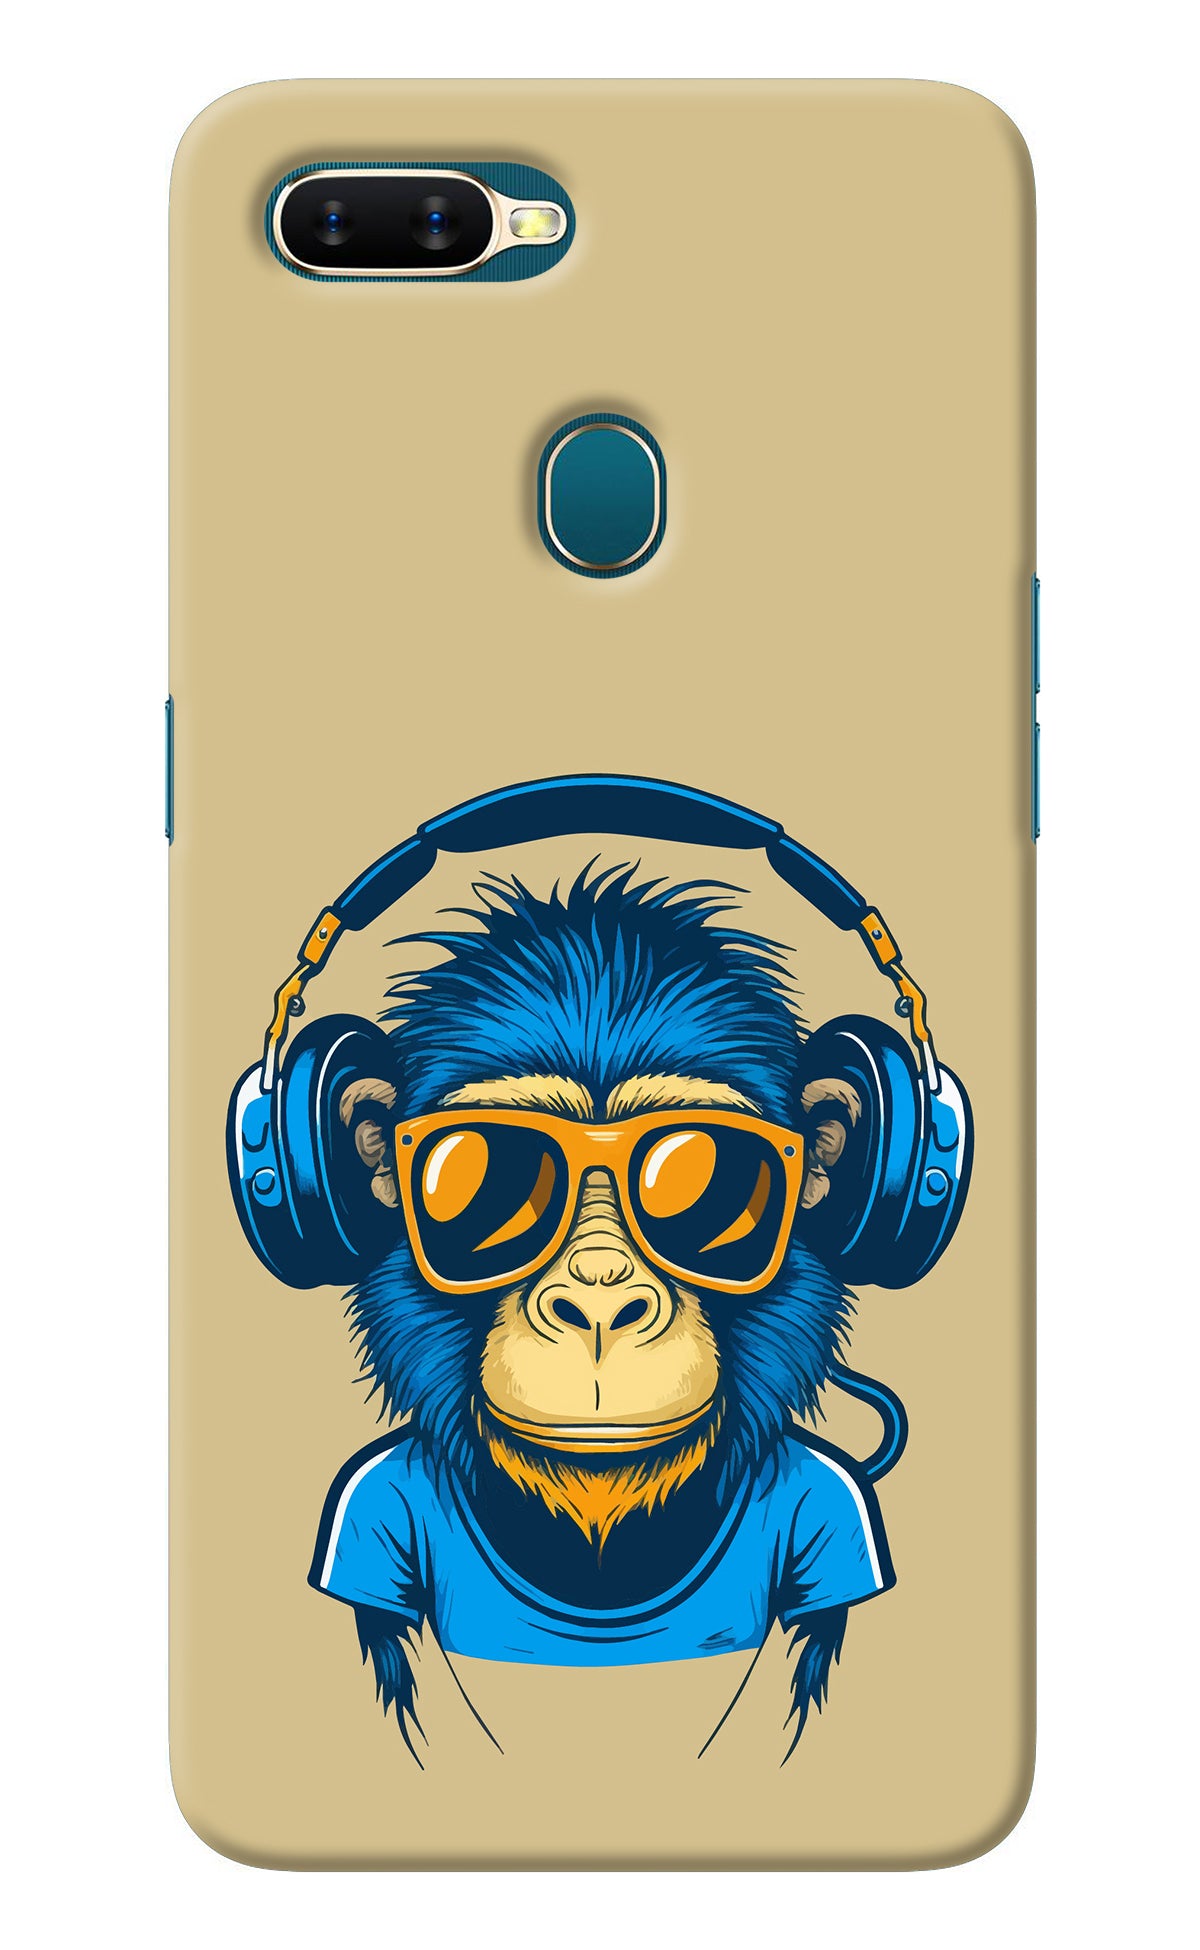 Monkey Headphone Oppo A7/A5s/A12 Back Cover